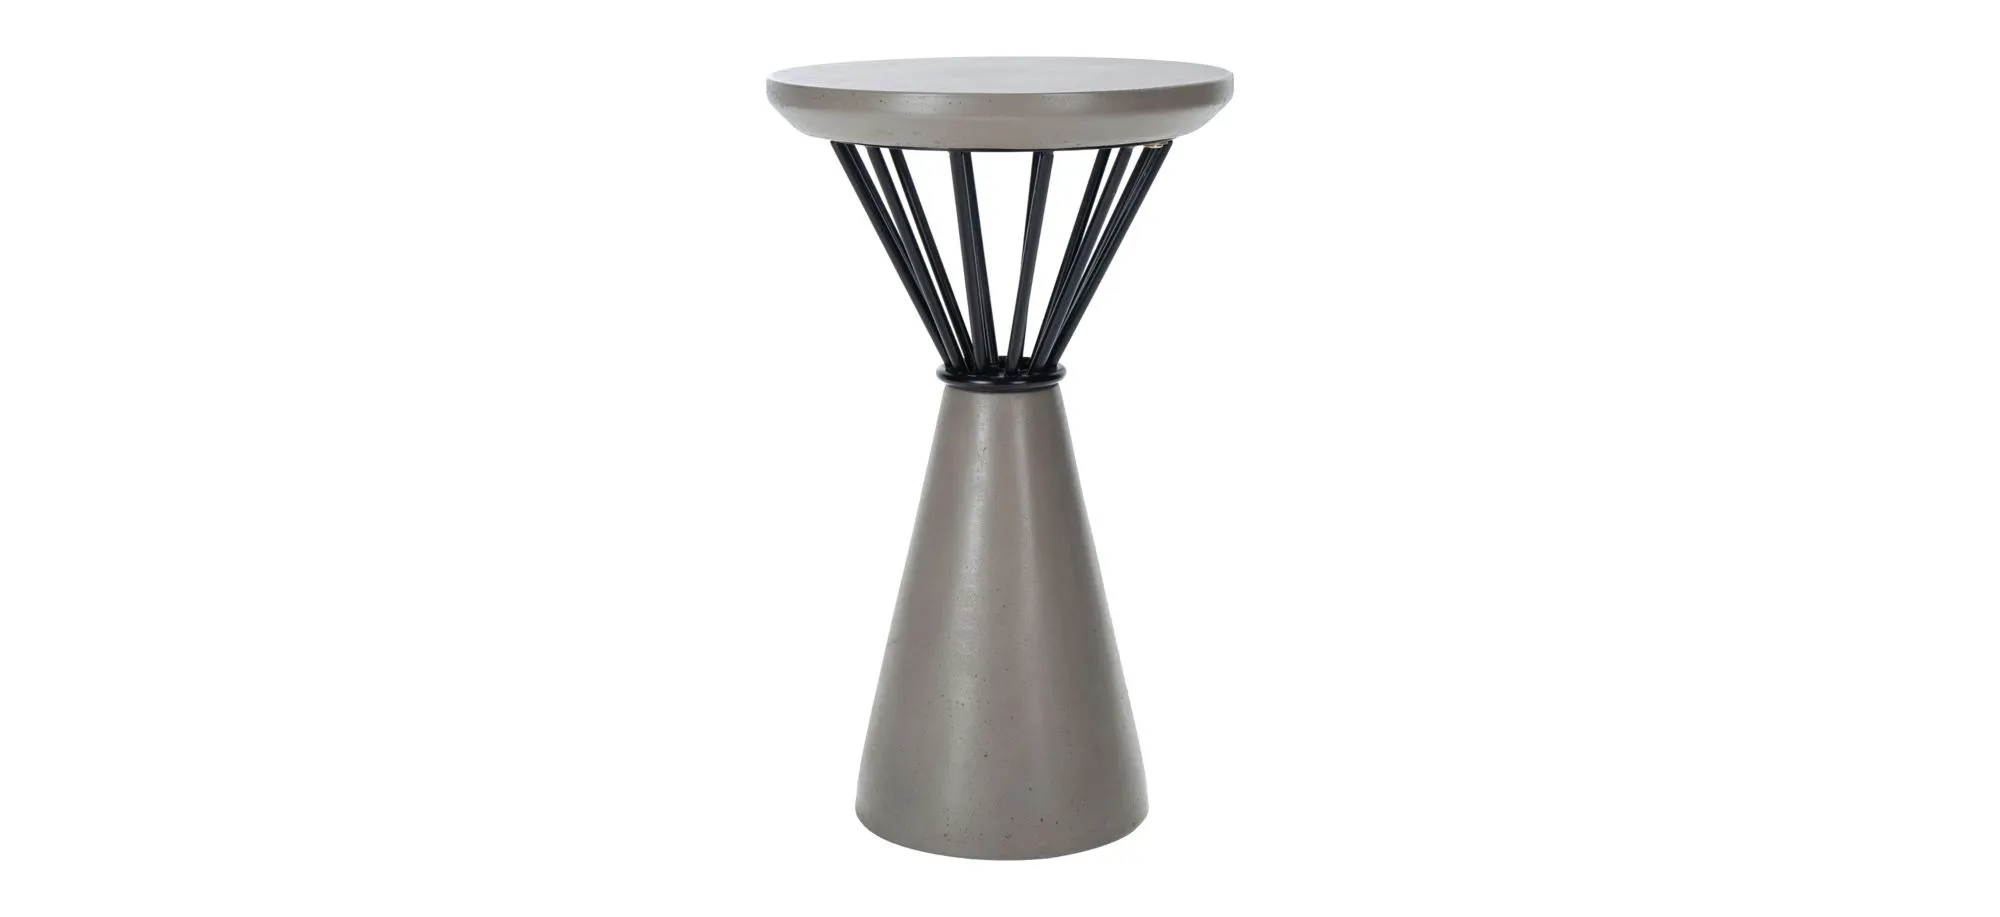 Rocklin Outdoor Concrete Accent Table in Liberty Bronze by Safavieh